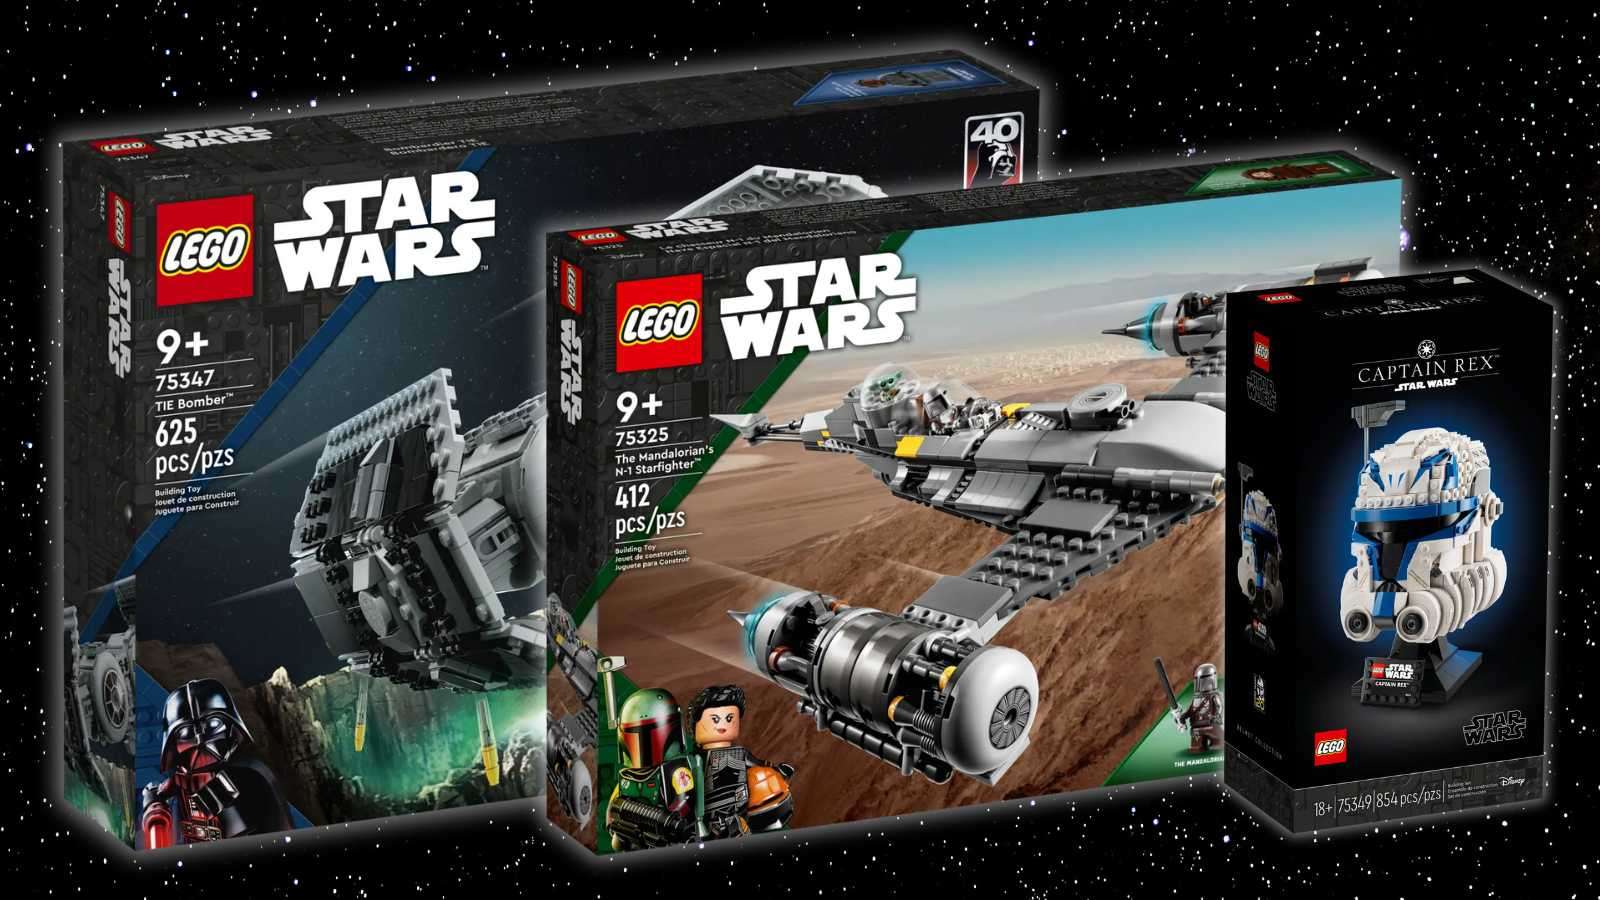 A few of the LEGO Star Wars sets discounted at Amazon on a galaxy background